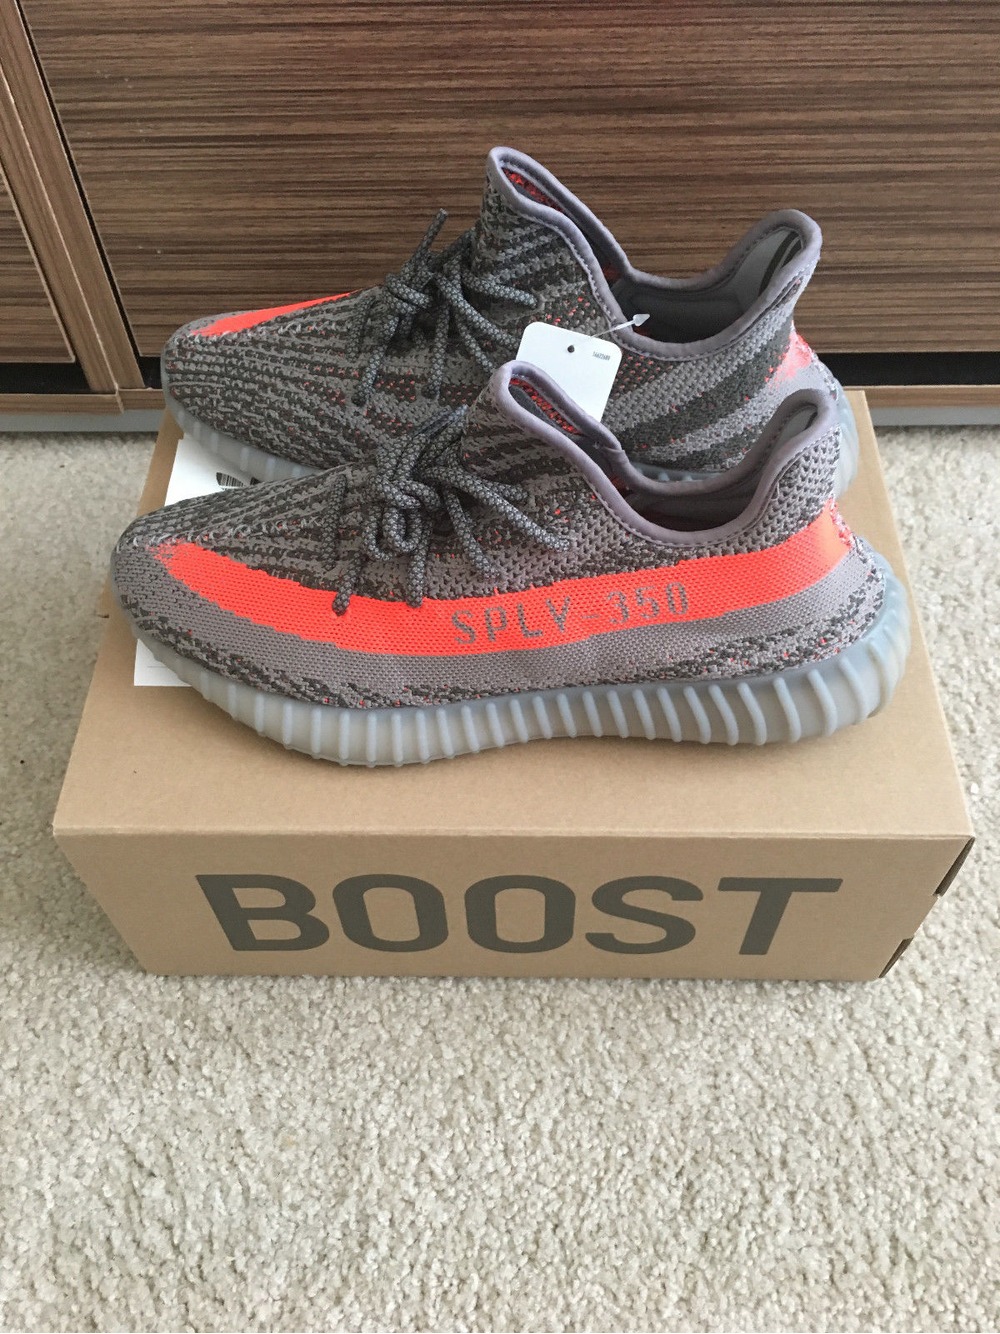 adidas Yeezy 350 V2 Boost Low SPLY Kanye West Black Red By9612